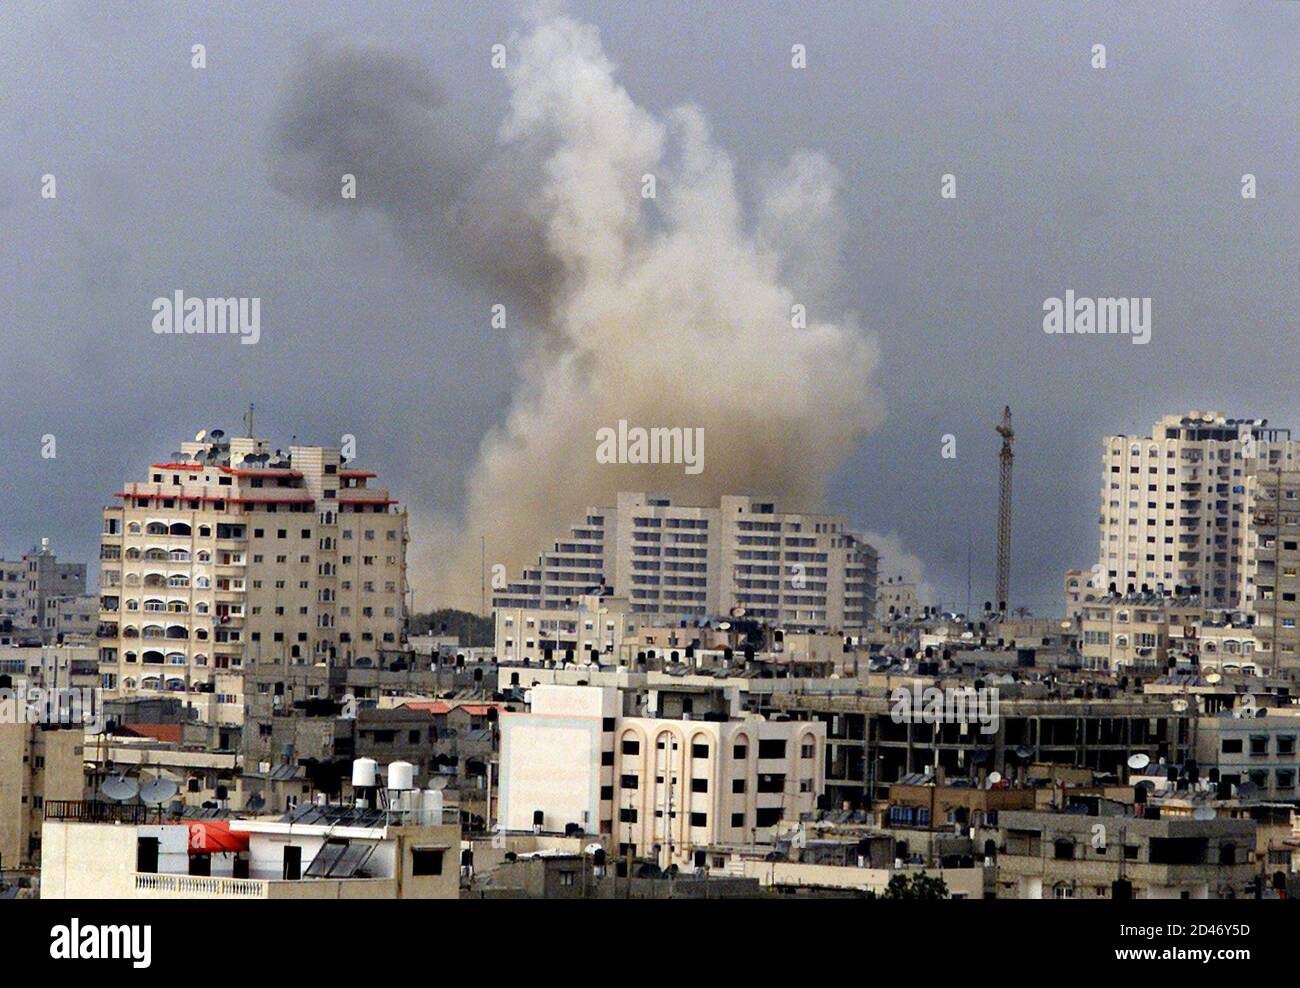 Smoke rises over Gaza after an Israeli warplane attacked the Palestinian police headquarters in the Gaza Strip March 10, 2002. [Israel retaliated on Sunday for a Palestinian suicide bombing that killed 11 Israelis in a Jerusalem cafe by destroying the Gaza headquarters that Yasser Arafat used as a showcase for Palestinian sovereignty.] Stock Photo